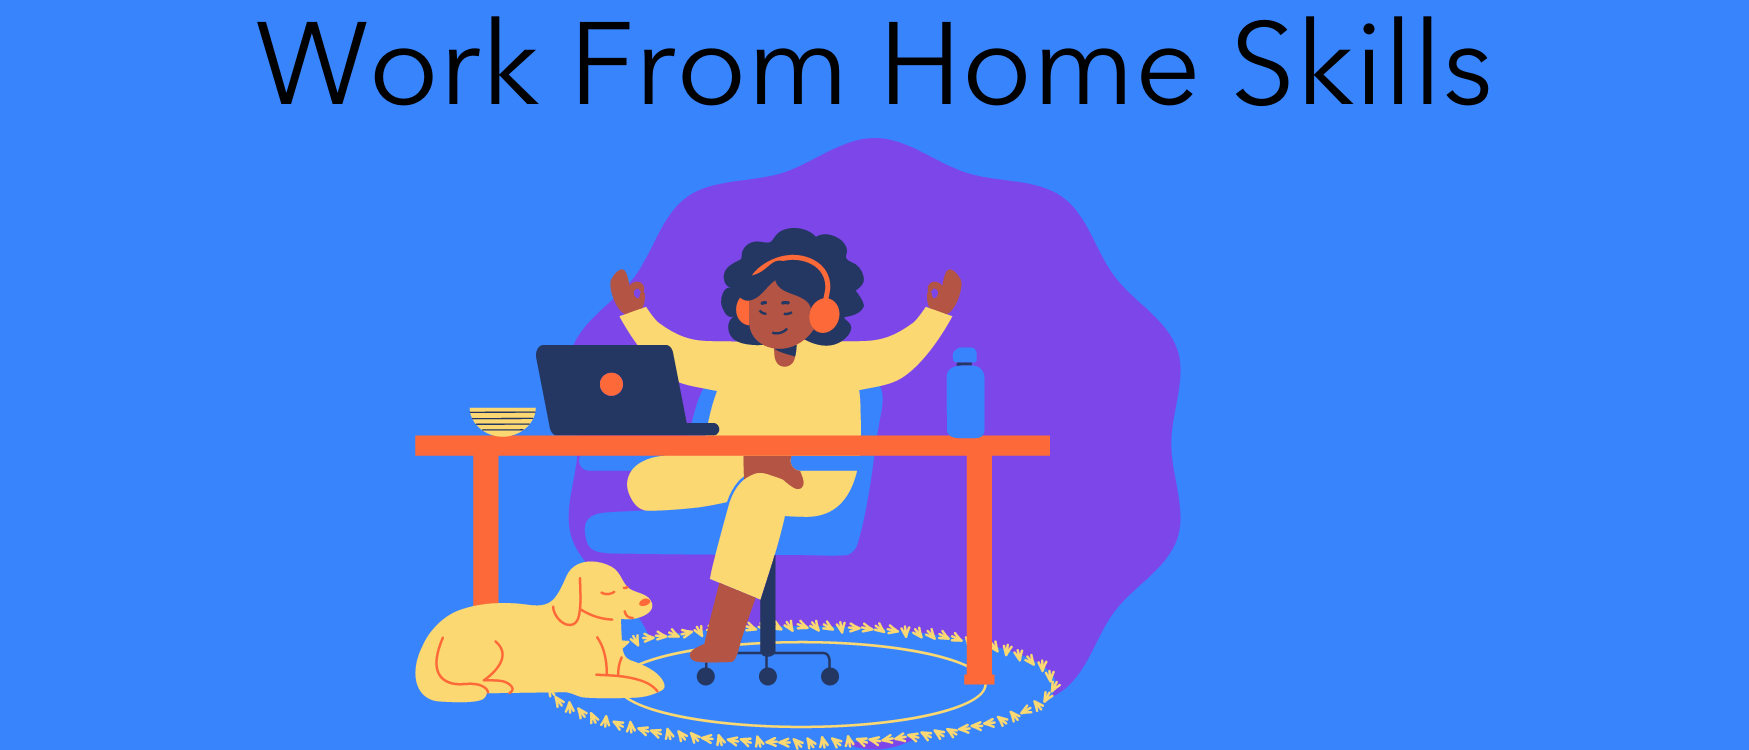 11 Must-Have Skills for Starting Full-Time Work From Home Jobs